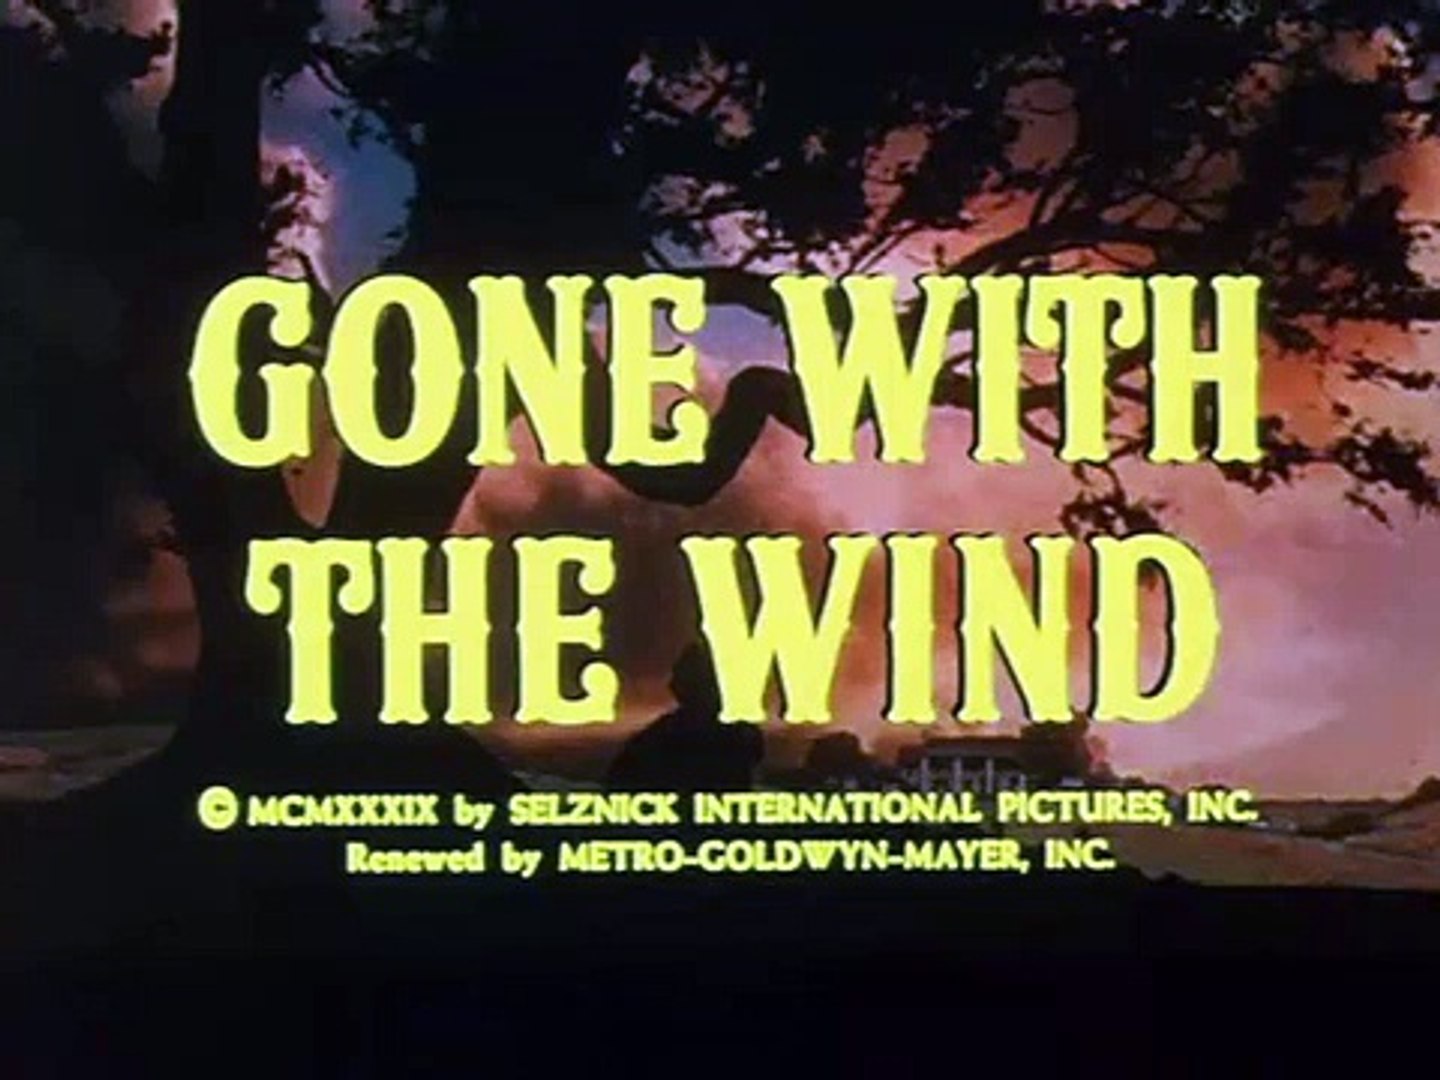 Leslie Howard Actor Gone With The Wind GWTW 1939 Trailer 70mm Re-Issue